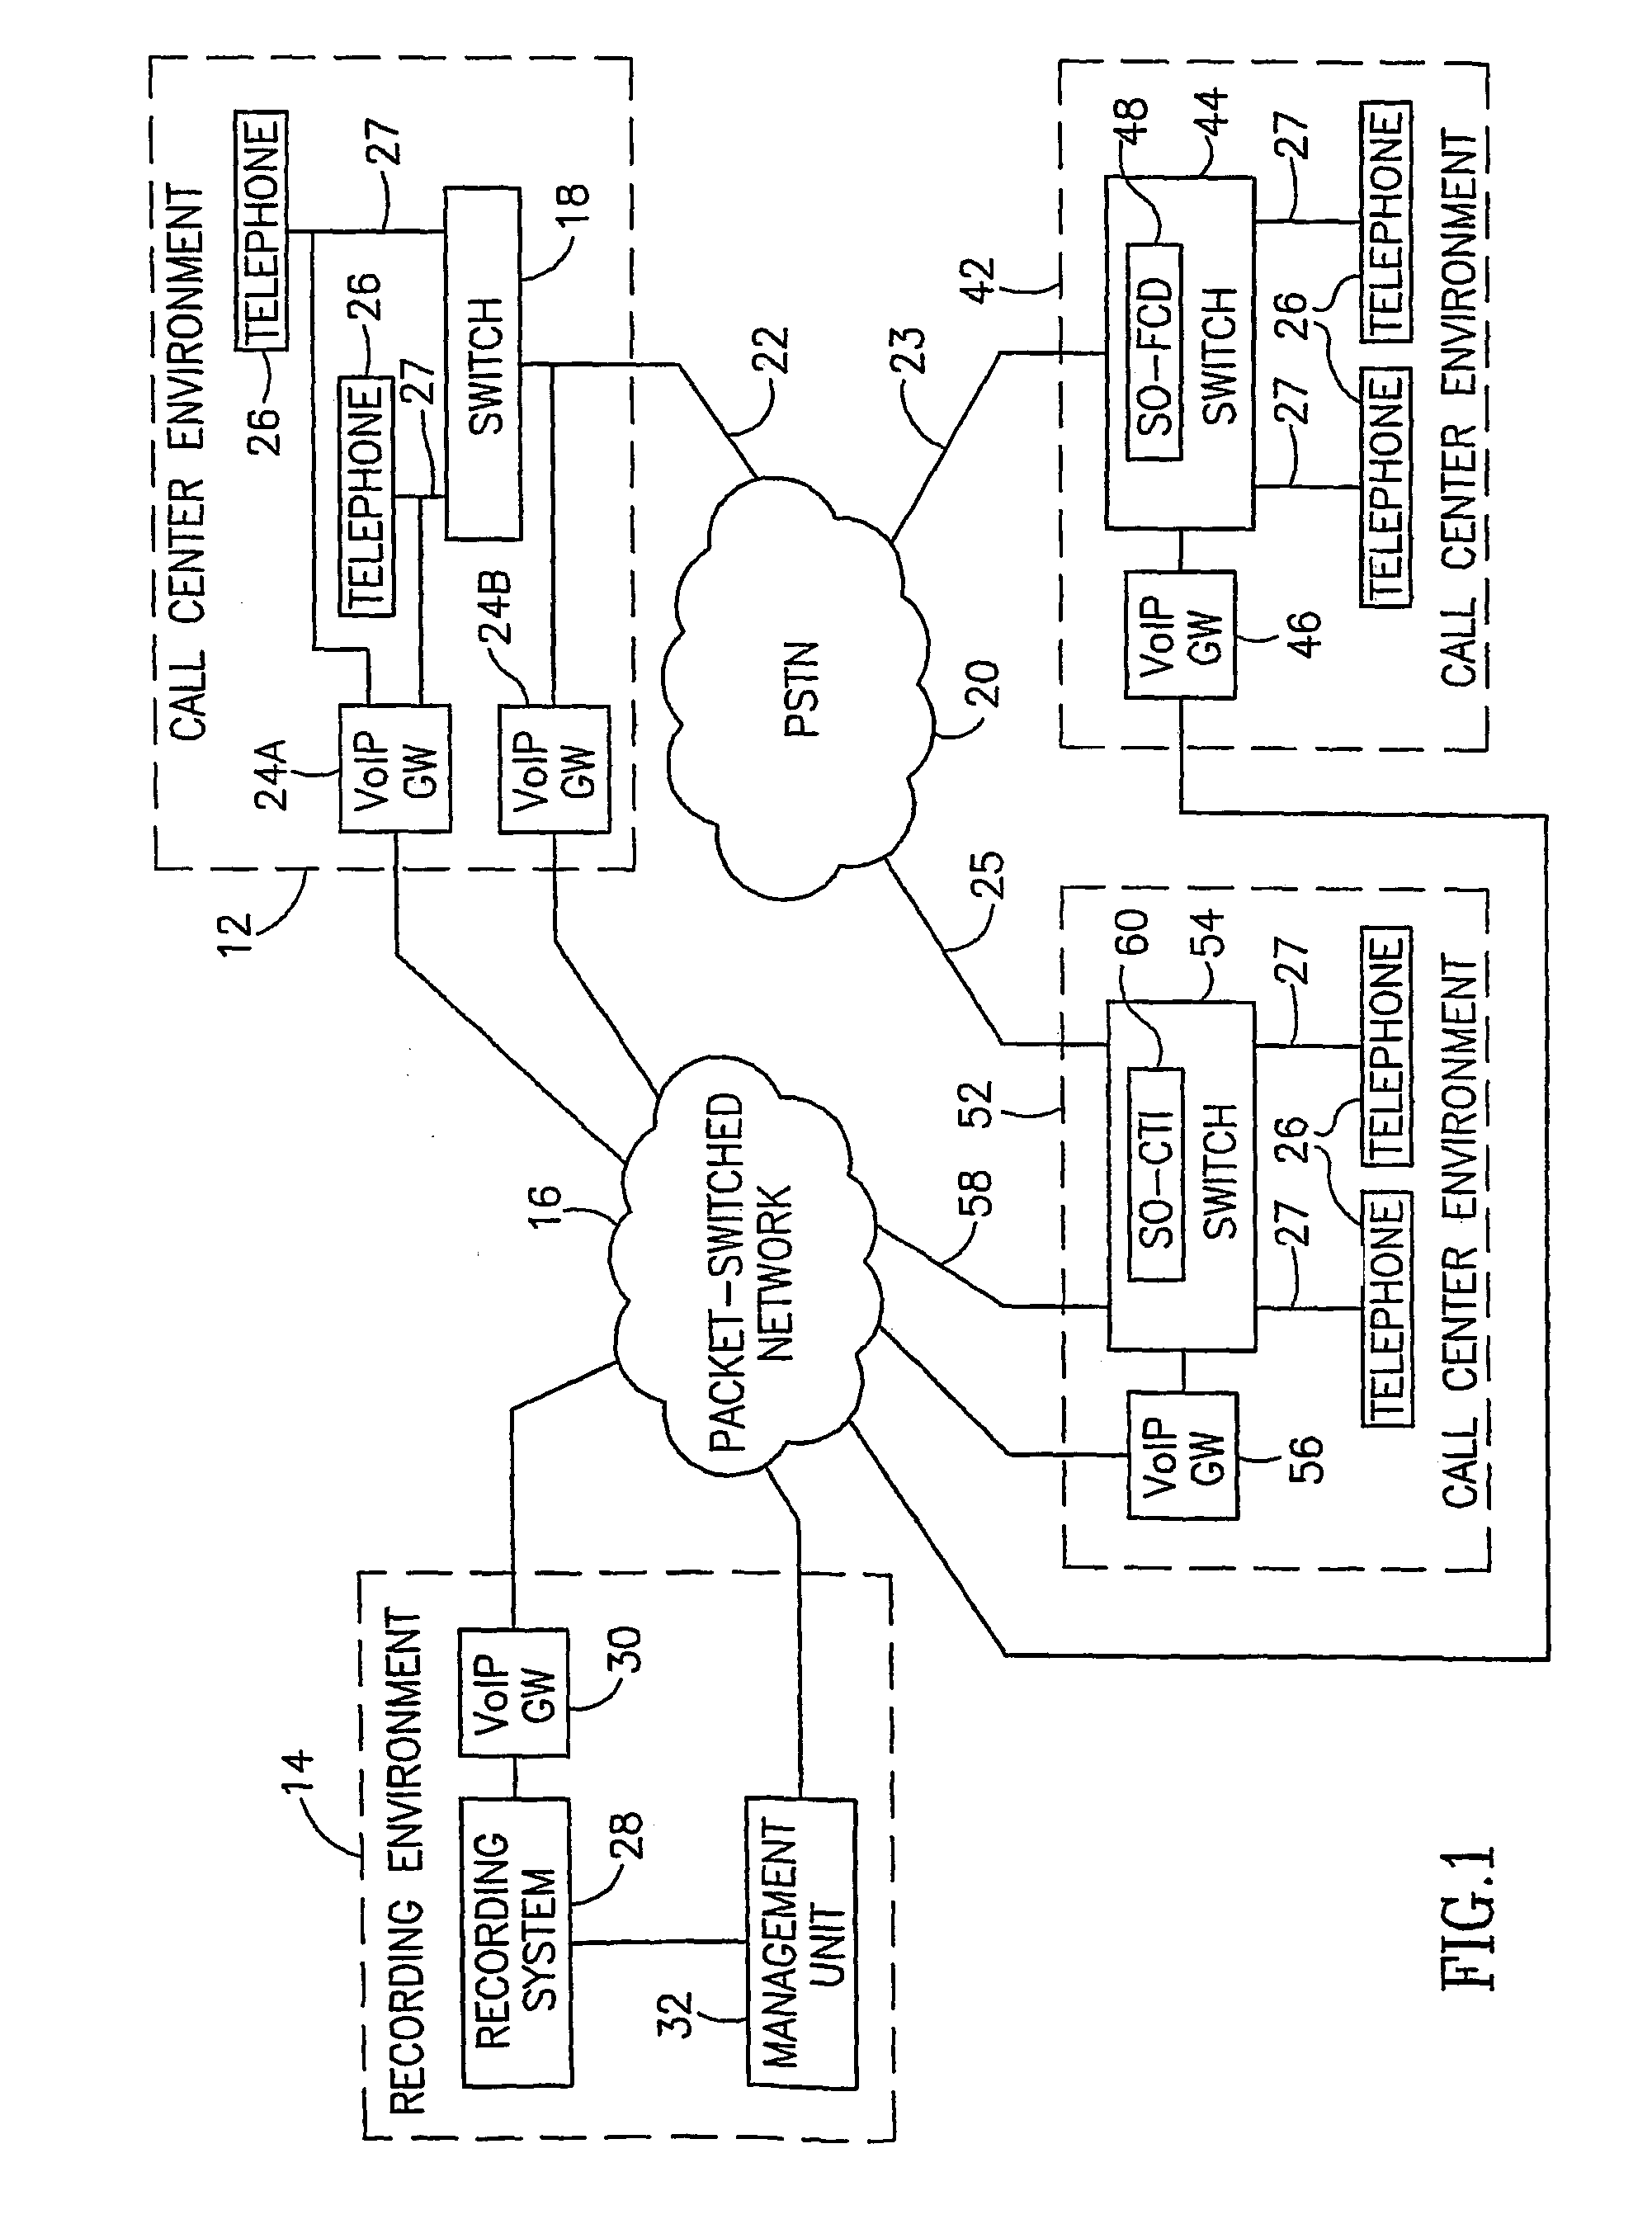 Method and system for monitoring and recording voice from circuit-switched via a packet-switched network